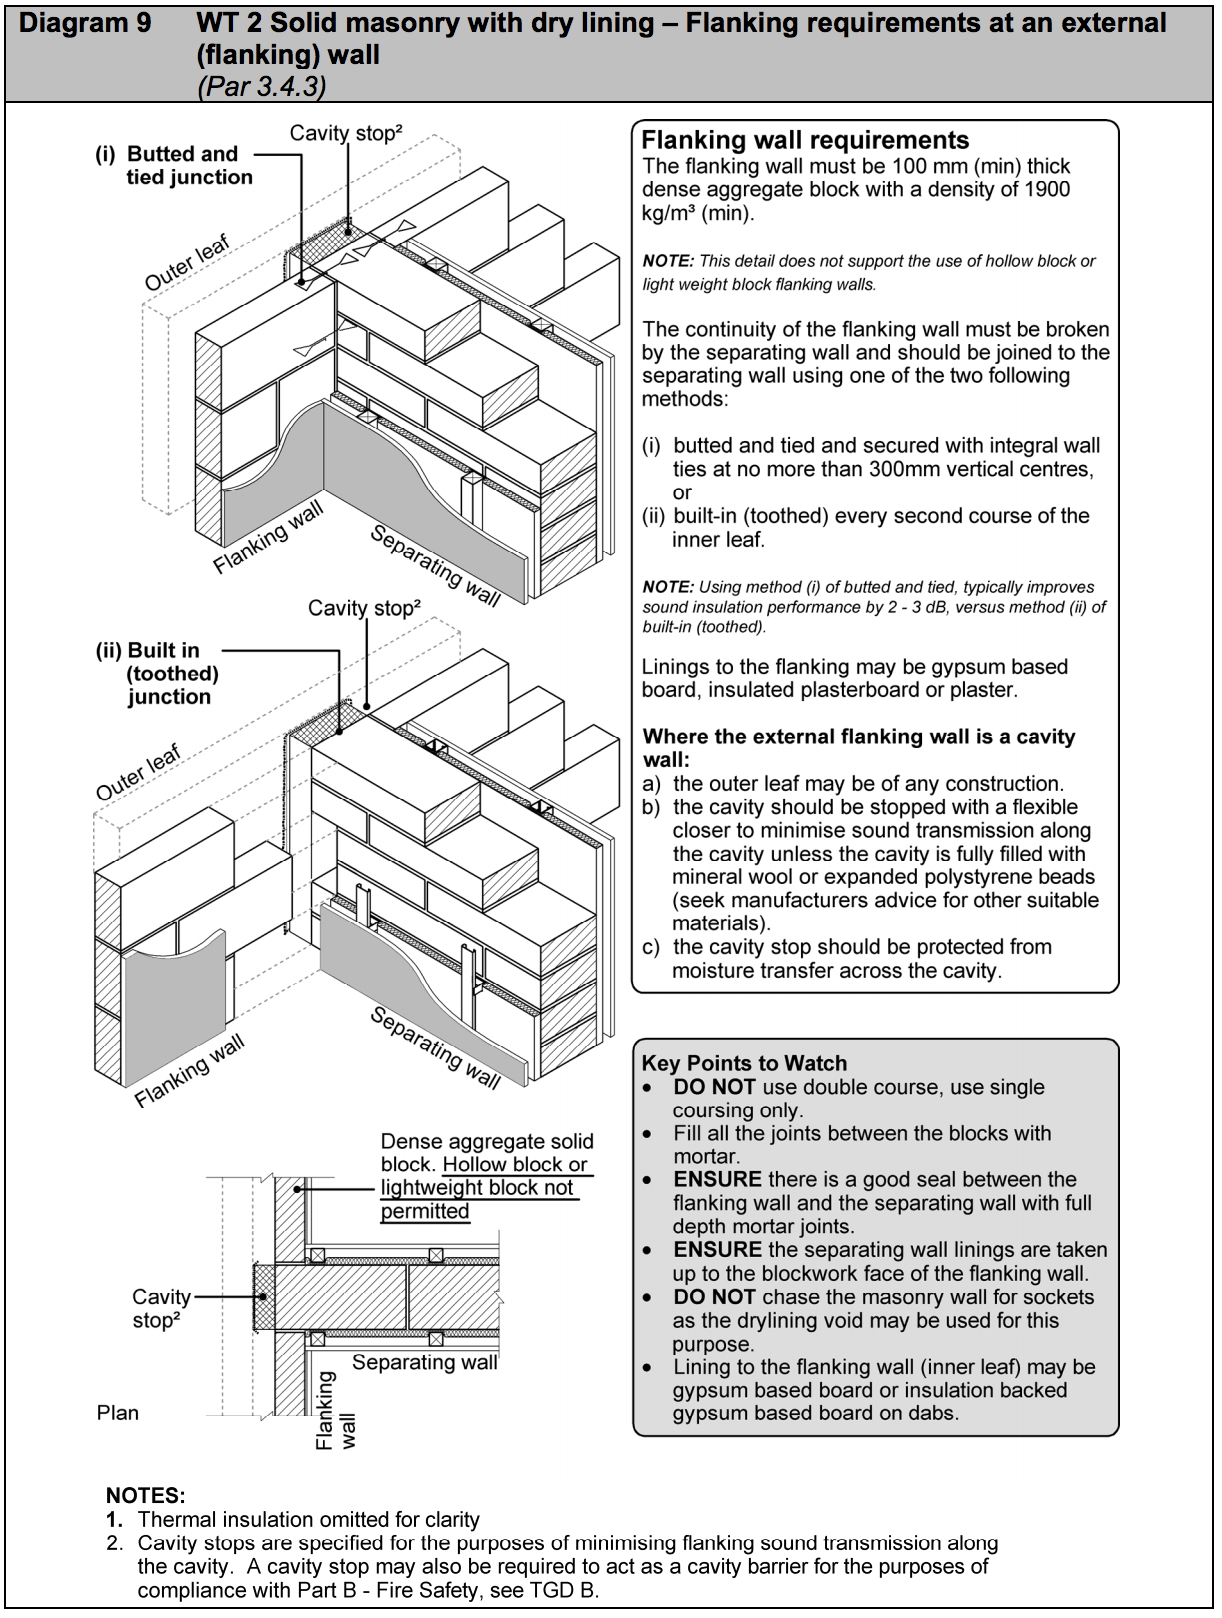 Diagram HE9 - WT 2 Solid masonry with dry lining - flanking requirements at an external (flanking) wall - Extract from TGD E